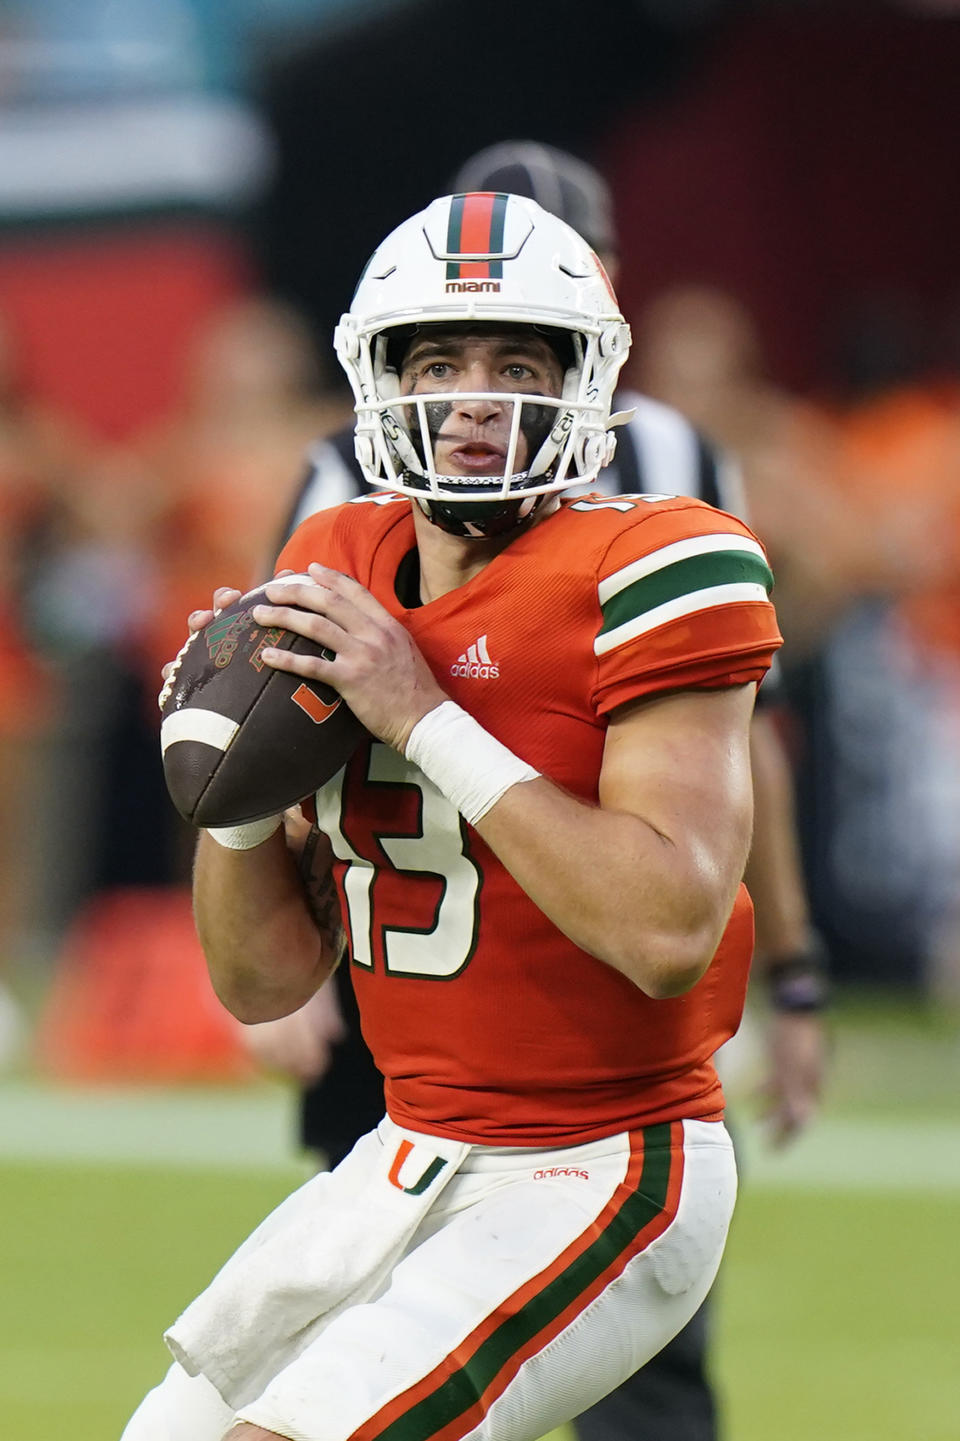 Miami quarterback Jake Garcia (13) drops back to pass during the second half of an NCAA college football game against Middle Tennessee, Saturday, Sept. 24, 2022, in Miami Gardens, Fla. (AP Photo/Wilfredo Lee)